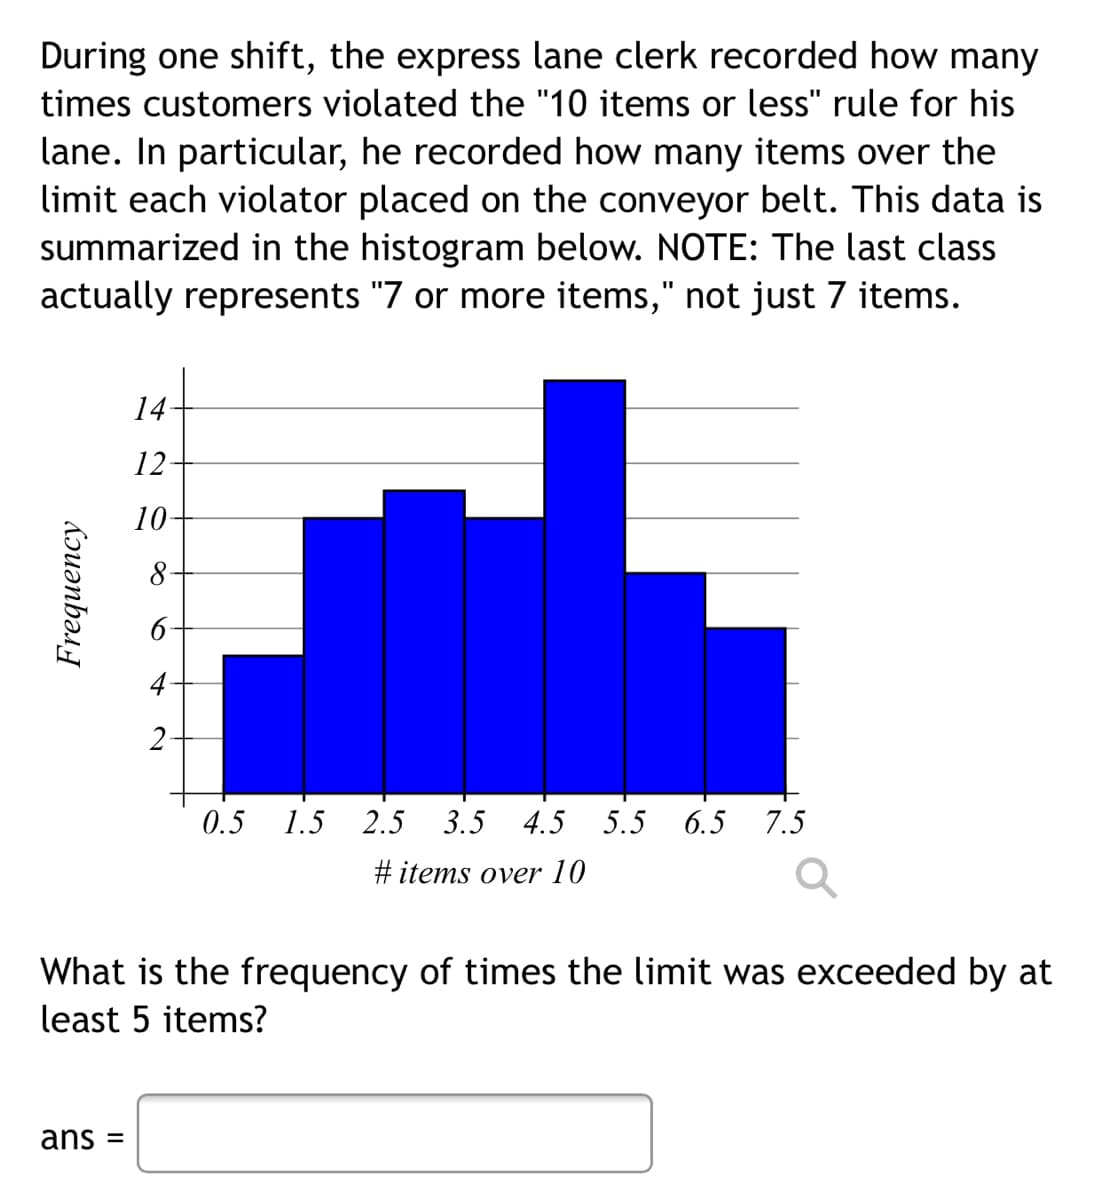 During one shift, the express lane clerk recorded how many
times customers violated the "10 items or less" rule for his
lane. In particular, he recorded how many items over the
limit each violator placed on the conveyor belt. This data is
summarized in the histogram below. NOTE: The last class
actually represents "7 or more items," not just 7 items.
14
12
10-
0.5
1.5 2.5 3.5 4.5 5.5 6.5 7.5
#items over 10
What is the frequency of times the limit was exceeded by at
least 5 items?
ans =
Frequency
8-
2